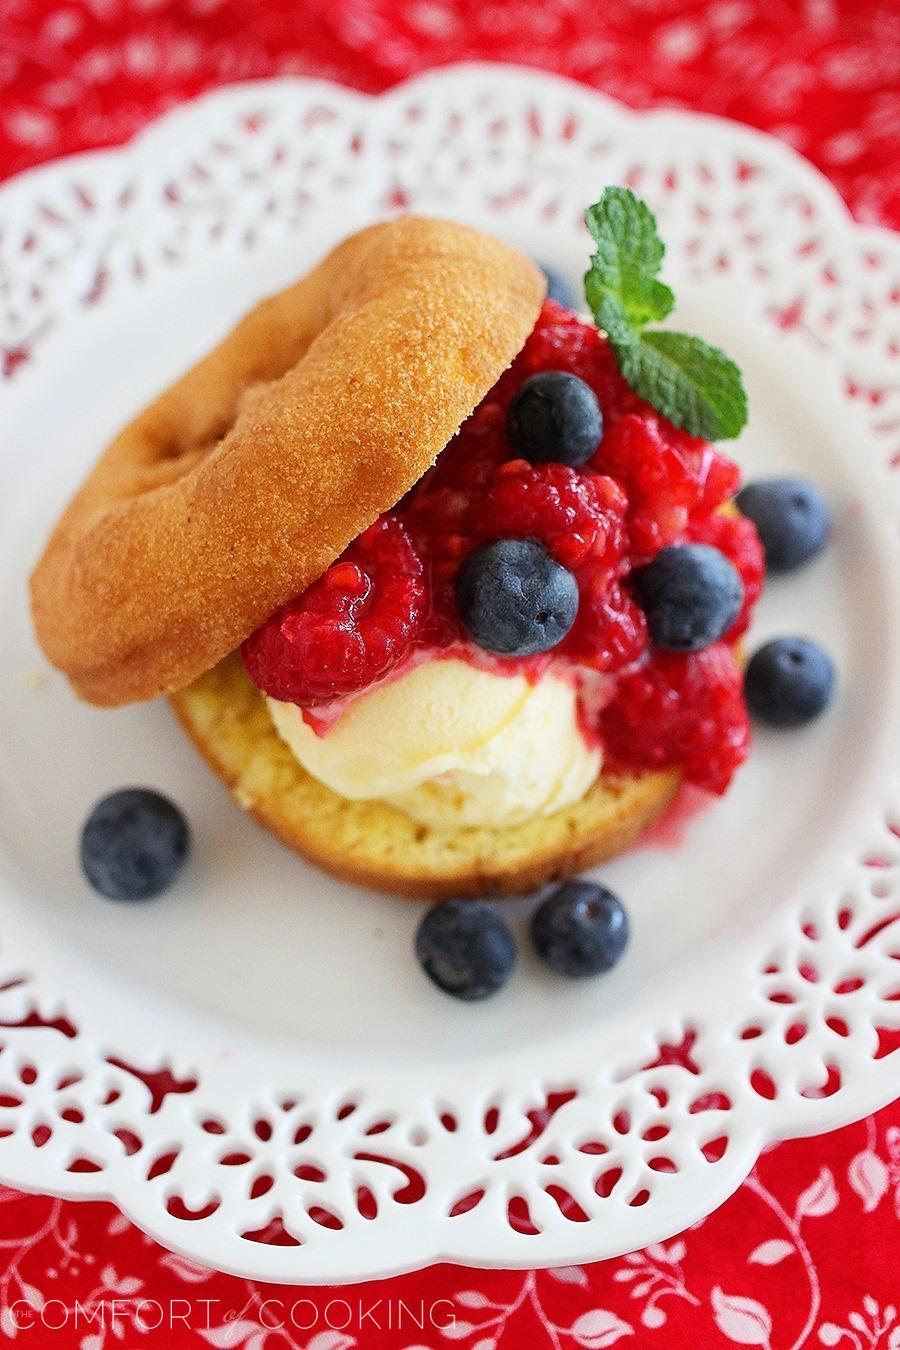 Easy No-Bake Berry Donut Shortcakes – For an indulgent breakfast or dessert, try donut shortcakes with berries - ready in 5 minutes! | thecomfortofcooking.com